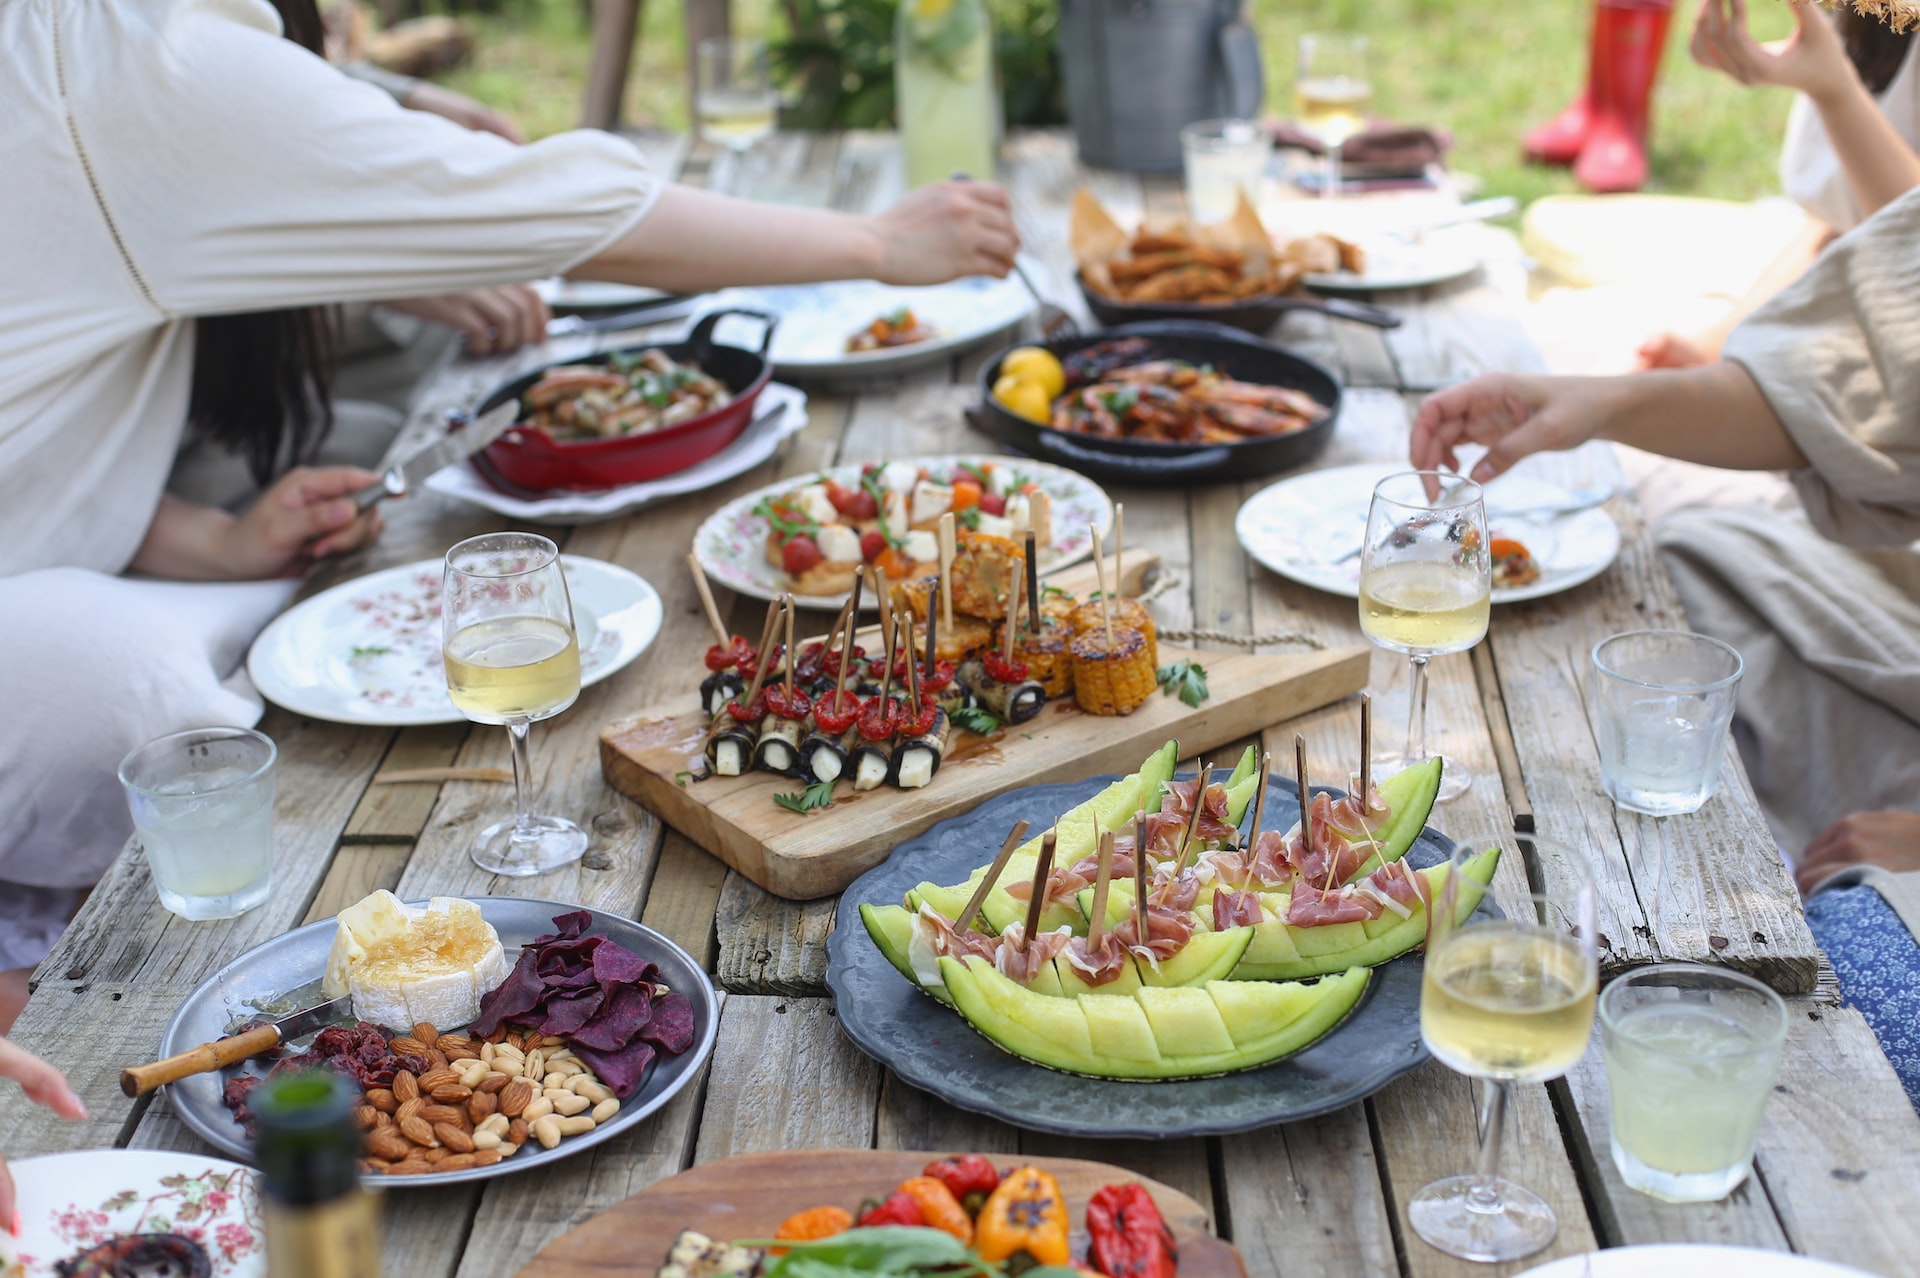 A friend group enjoys some of the summer dinner party ideas.